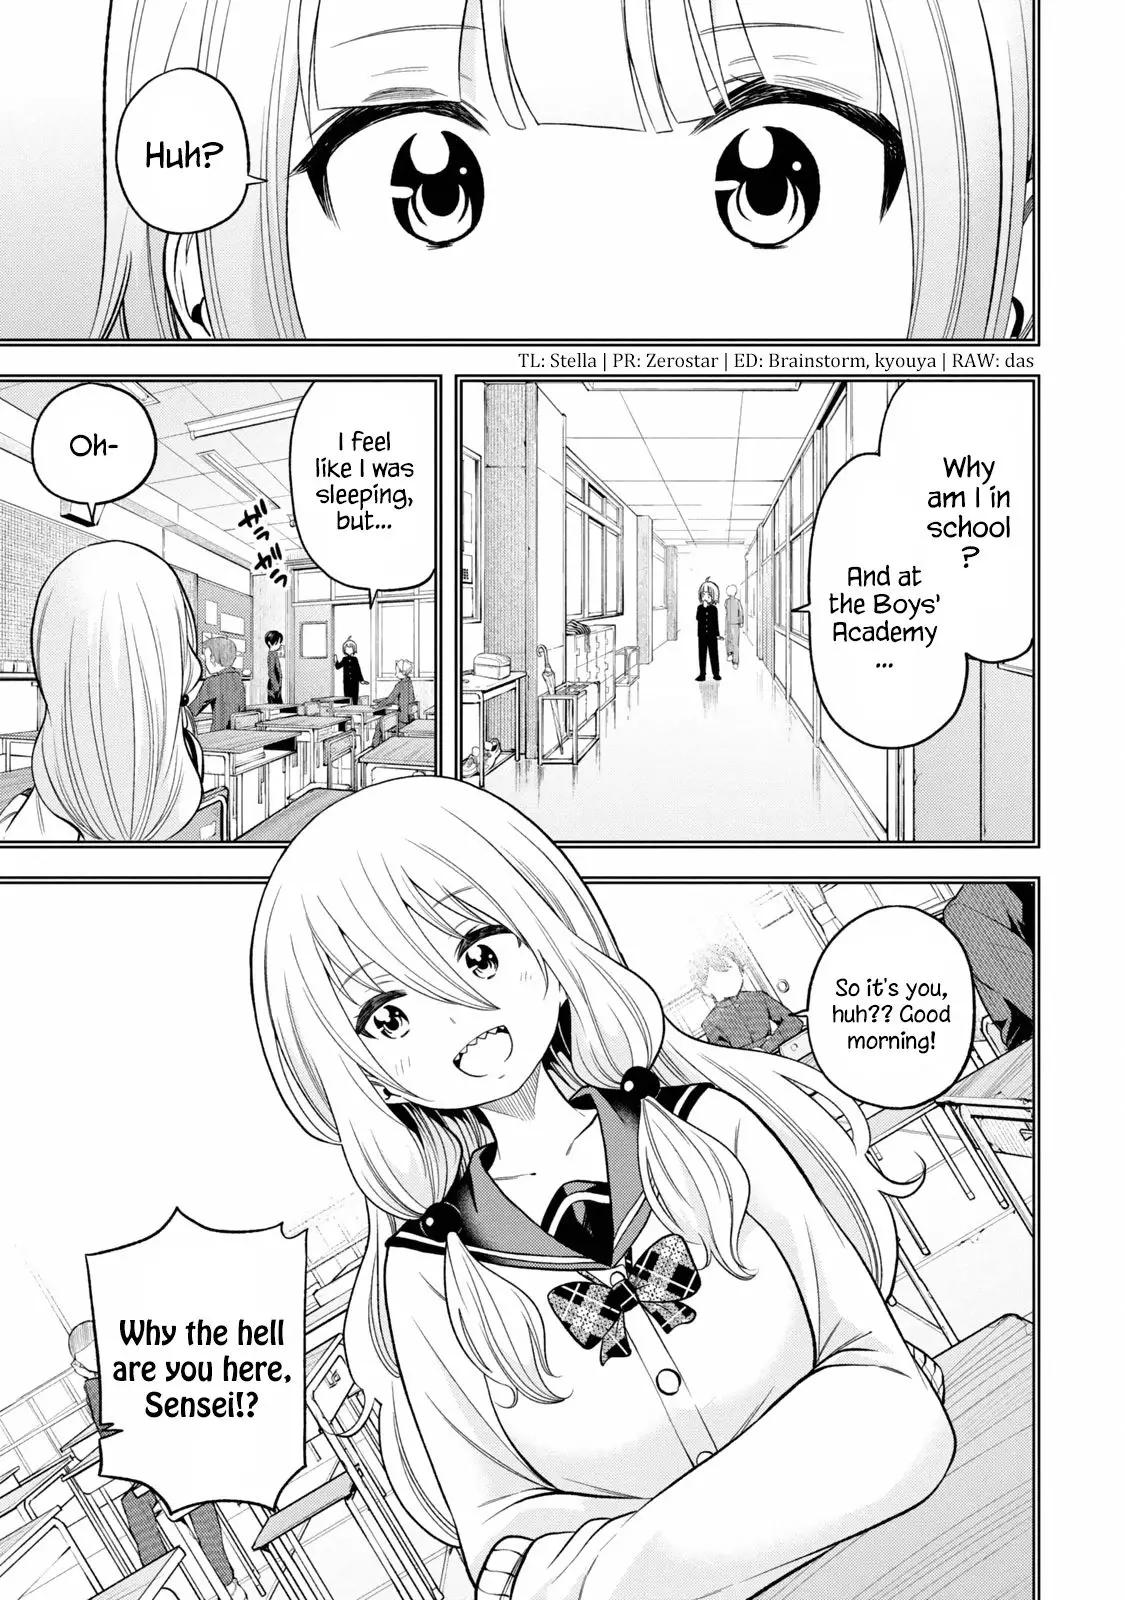 Why are you here Sensei!? - 86 page 3